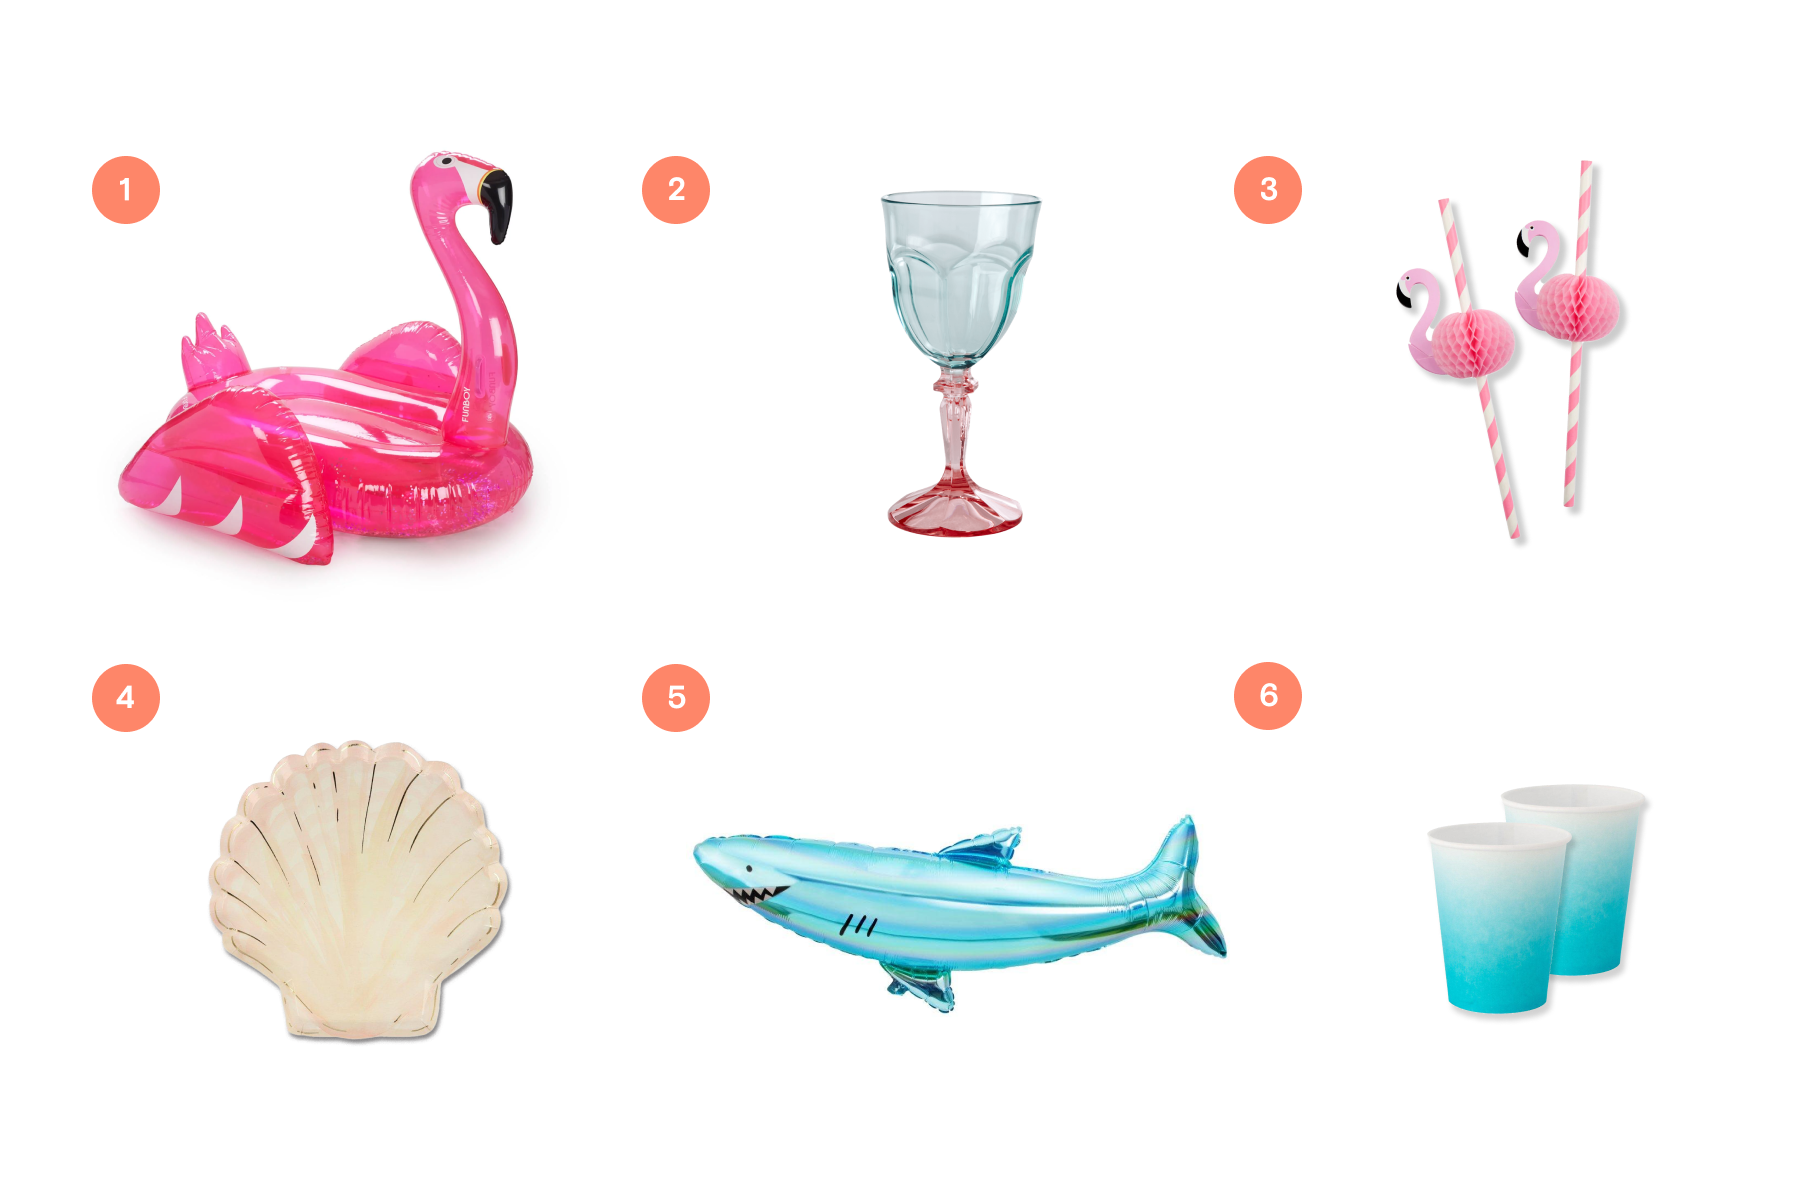 assortment of 6 beach party decorations